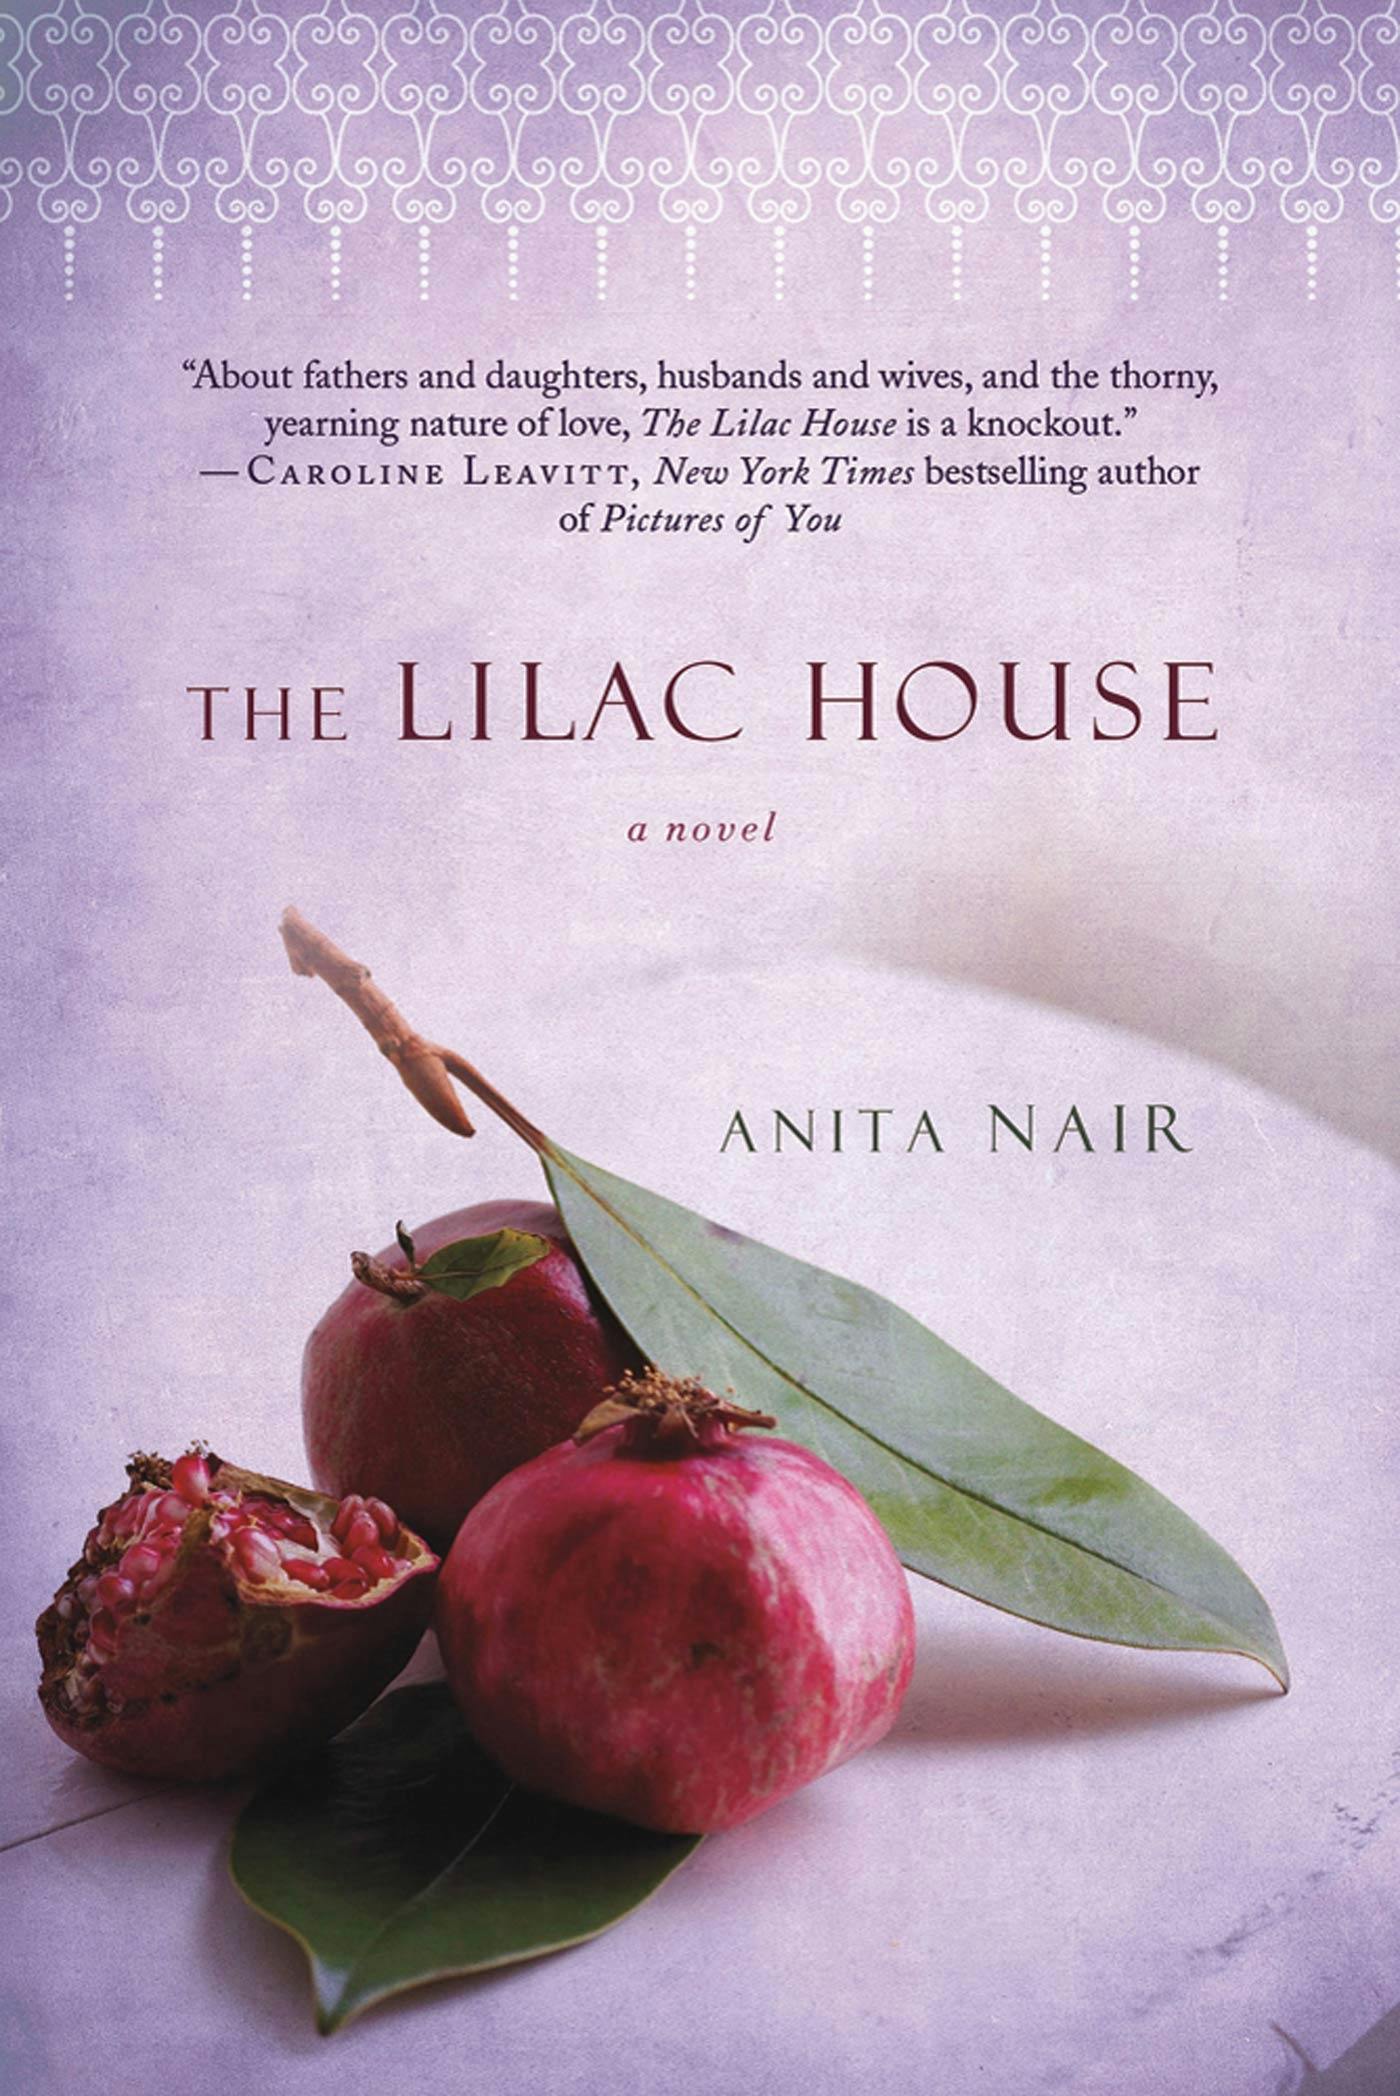 The Lilac House pic